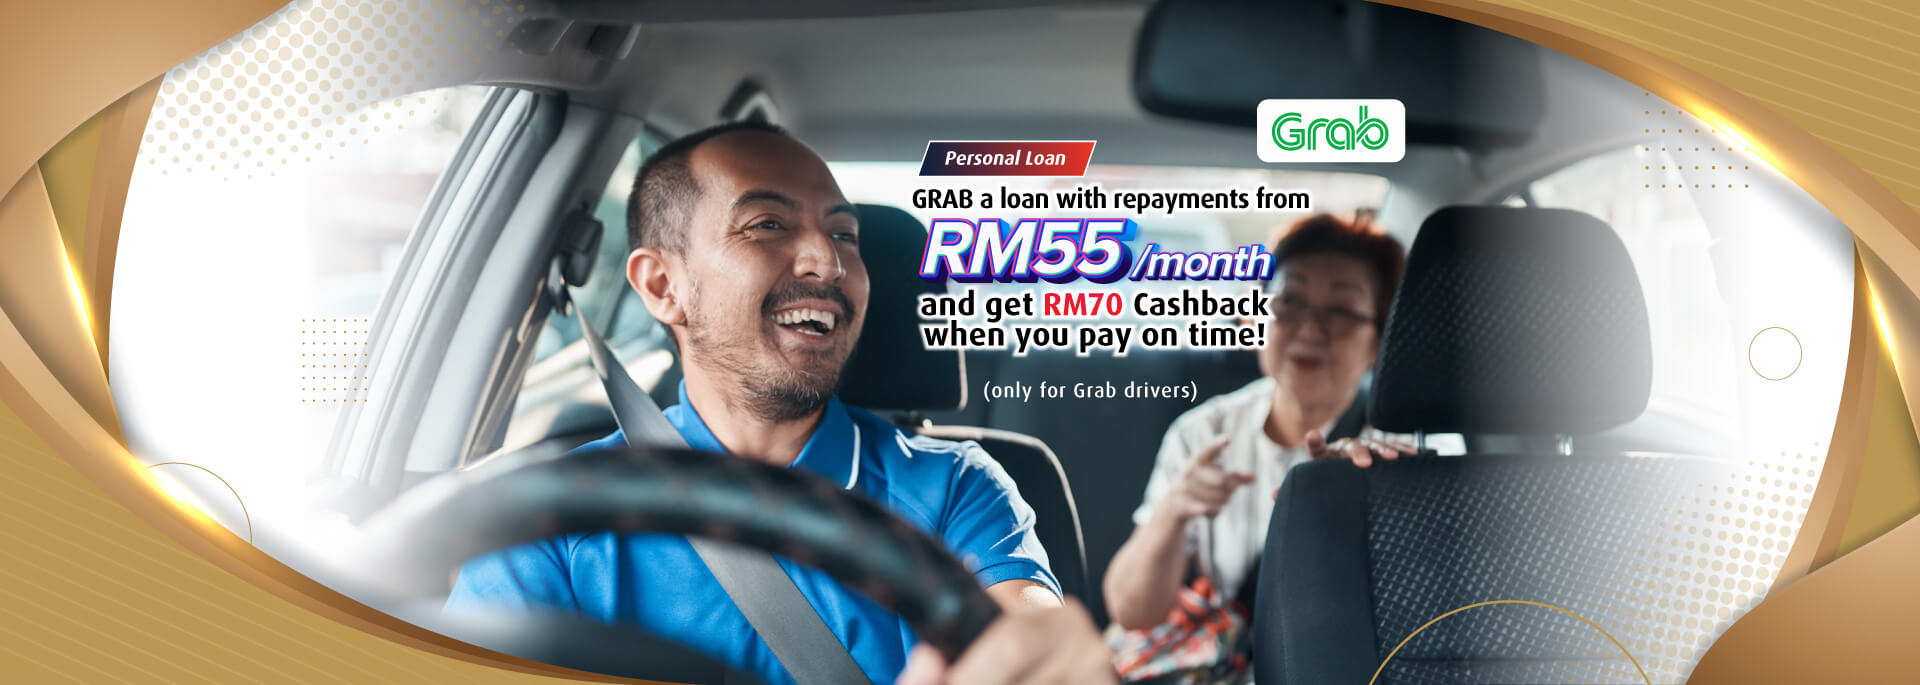 Personal Loan Grab It Now (November to December) 2021 Campaign (6 & 12 months)